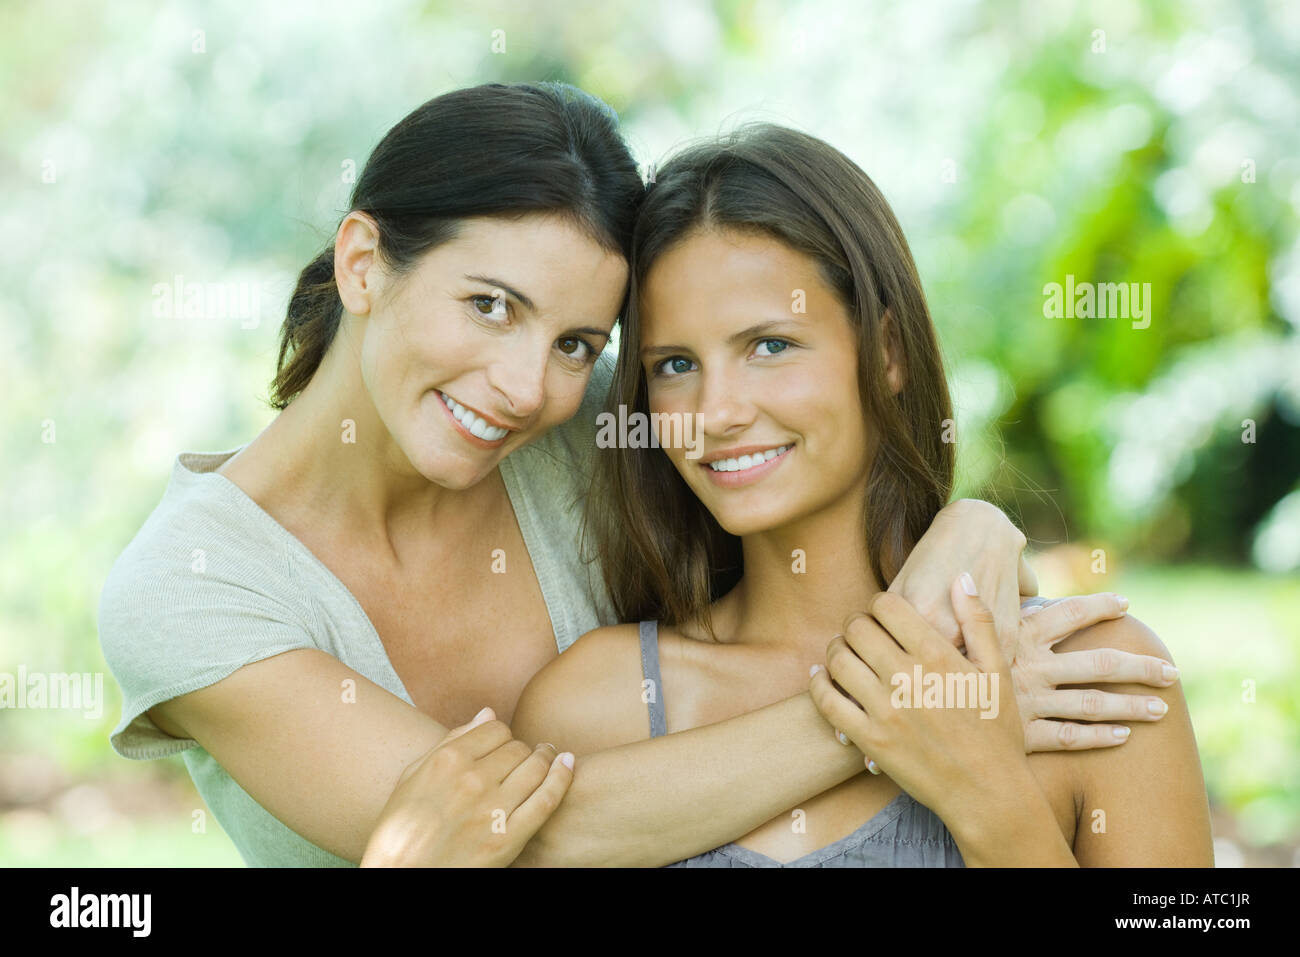 Mother and daughter smiling at camera together, portrait Stock Photo